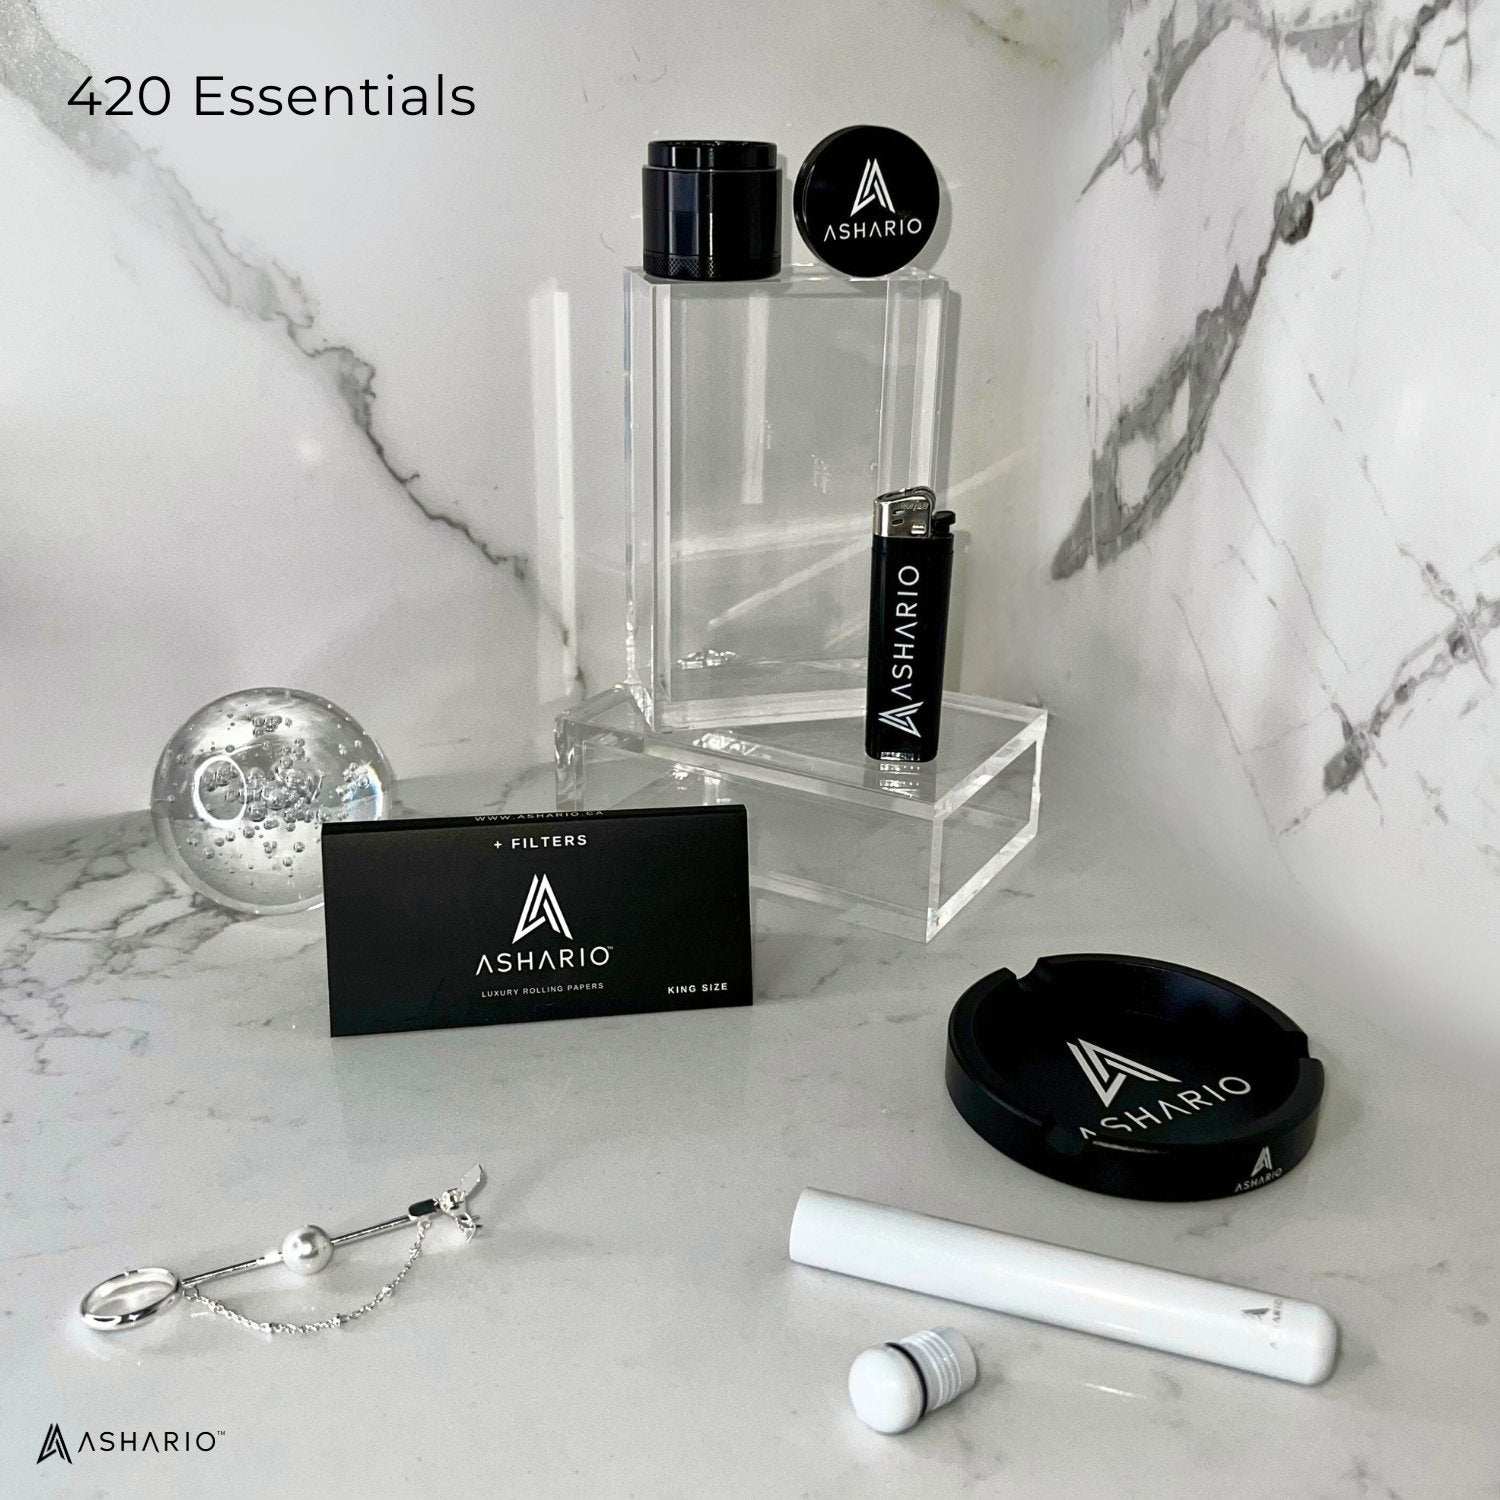 Welcome to the Ashario Cannabis dispensary, your premier destination for high-quality cannabis products in North York.